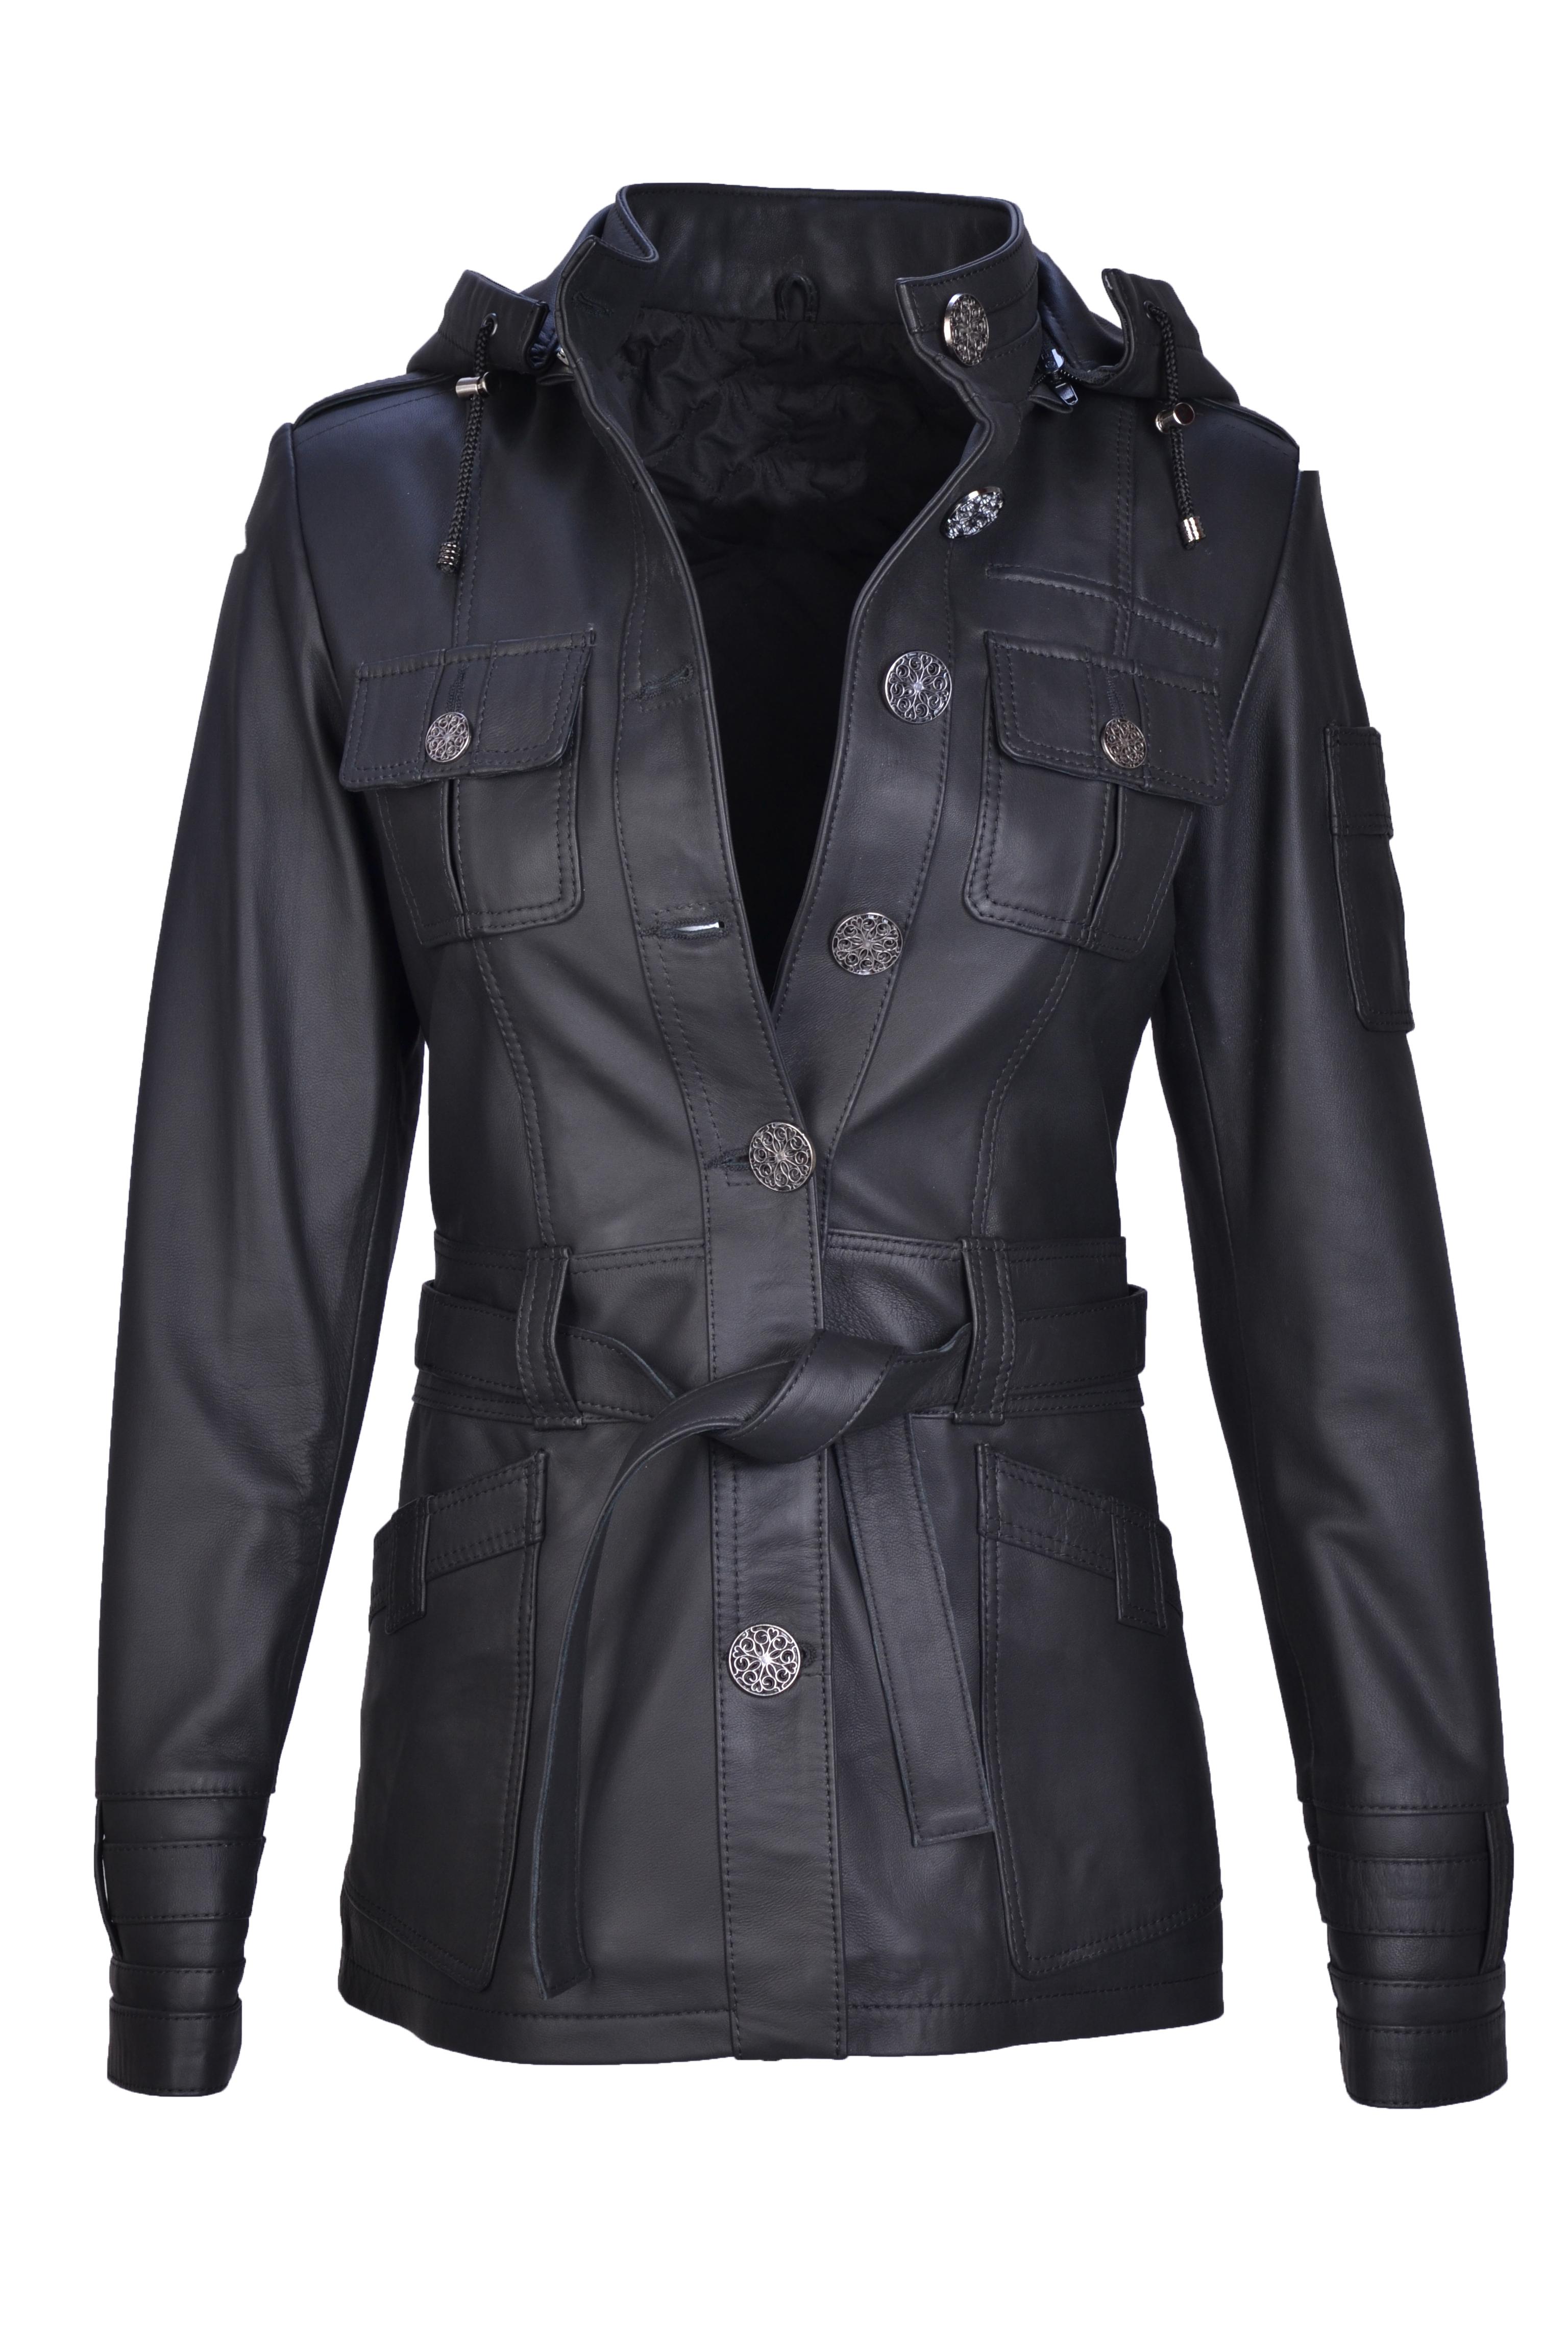 Stylish and Modern Design Black Genuine Leather Jacket for Women with Hooded and Belt Sandy